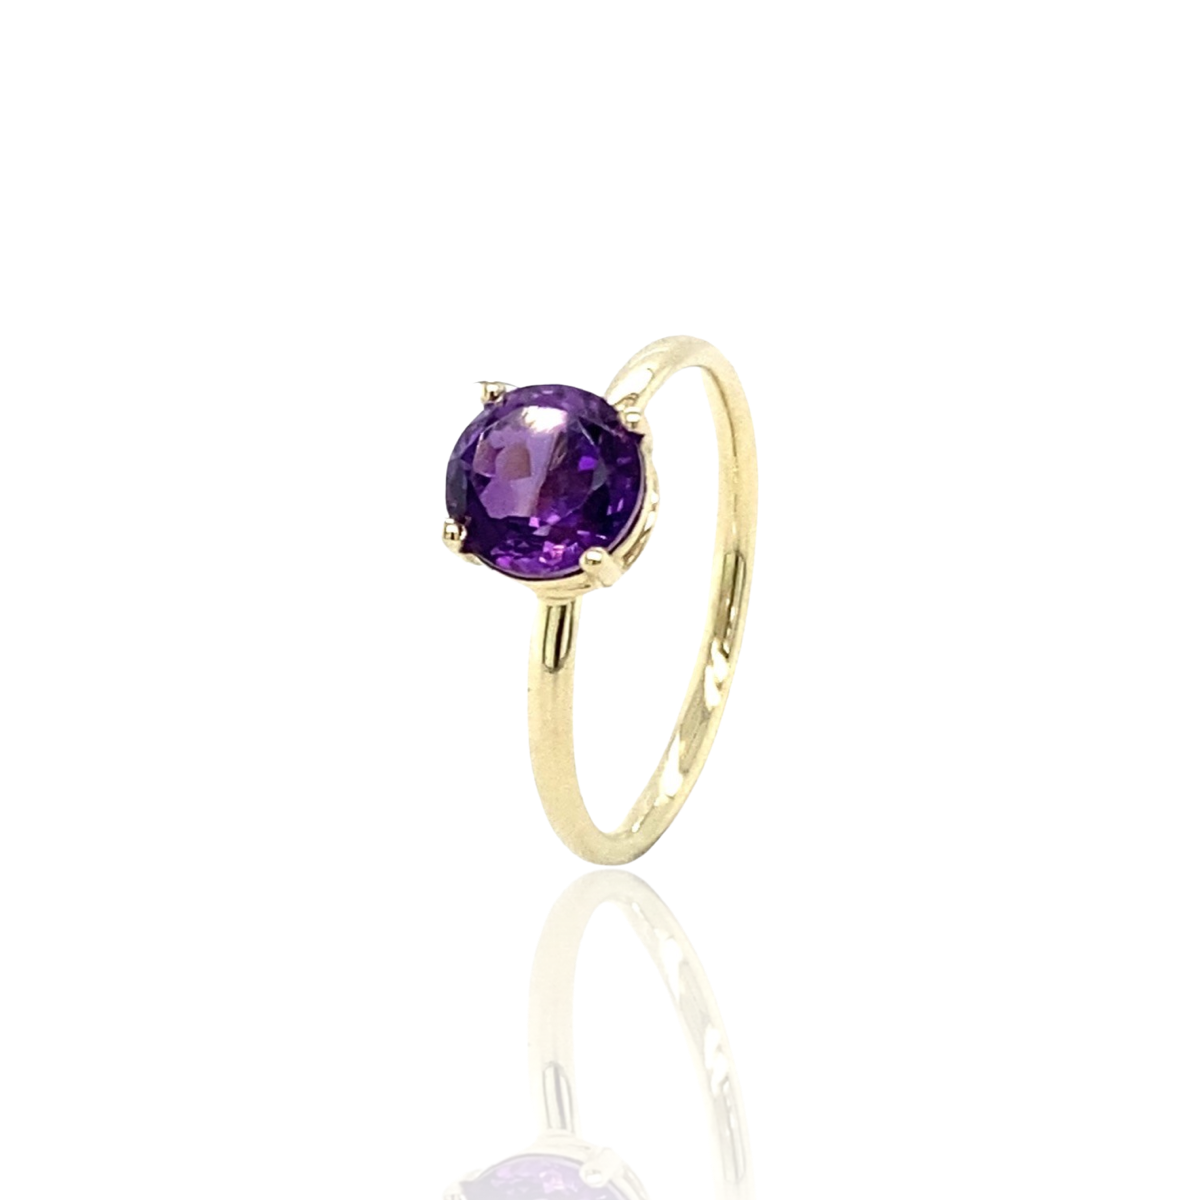 Stackable Amethyst ring in 14k yellow gold